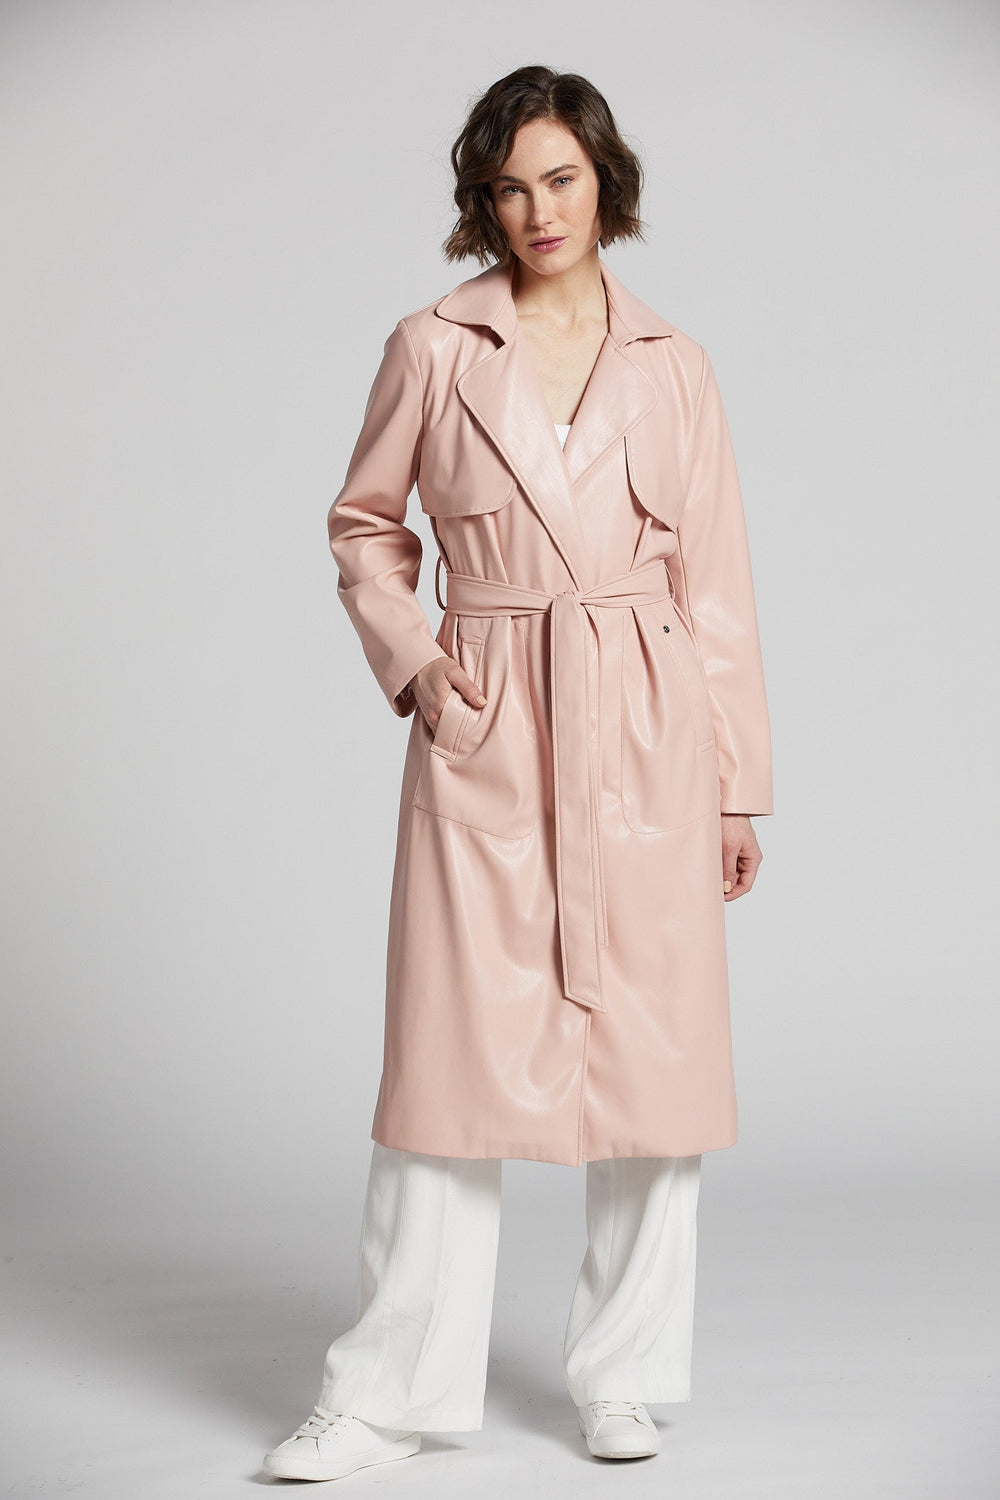 Adroit Atelier Nina Faux Leather Trench Coat in Blush